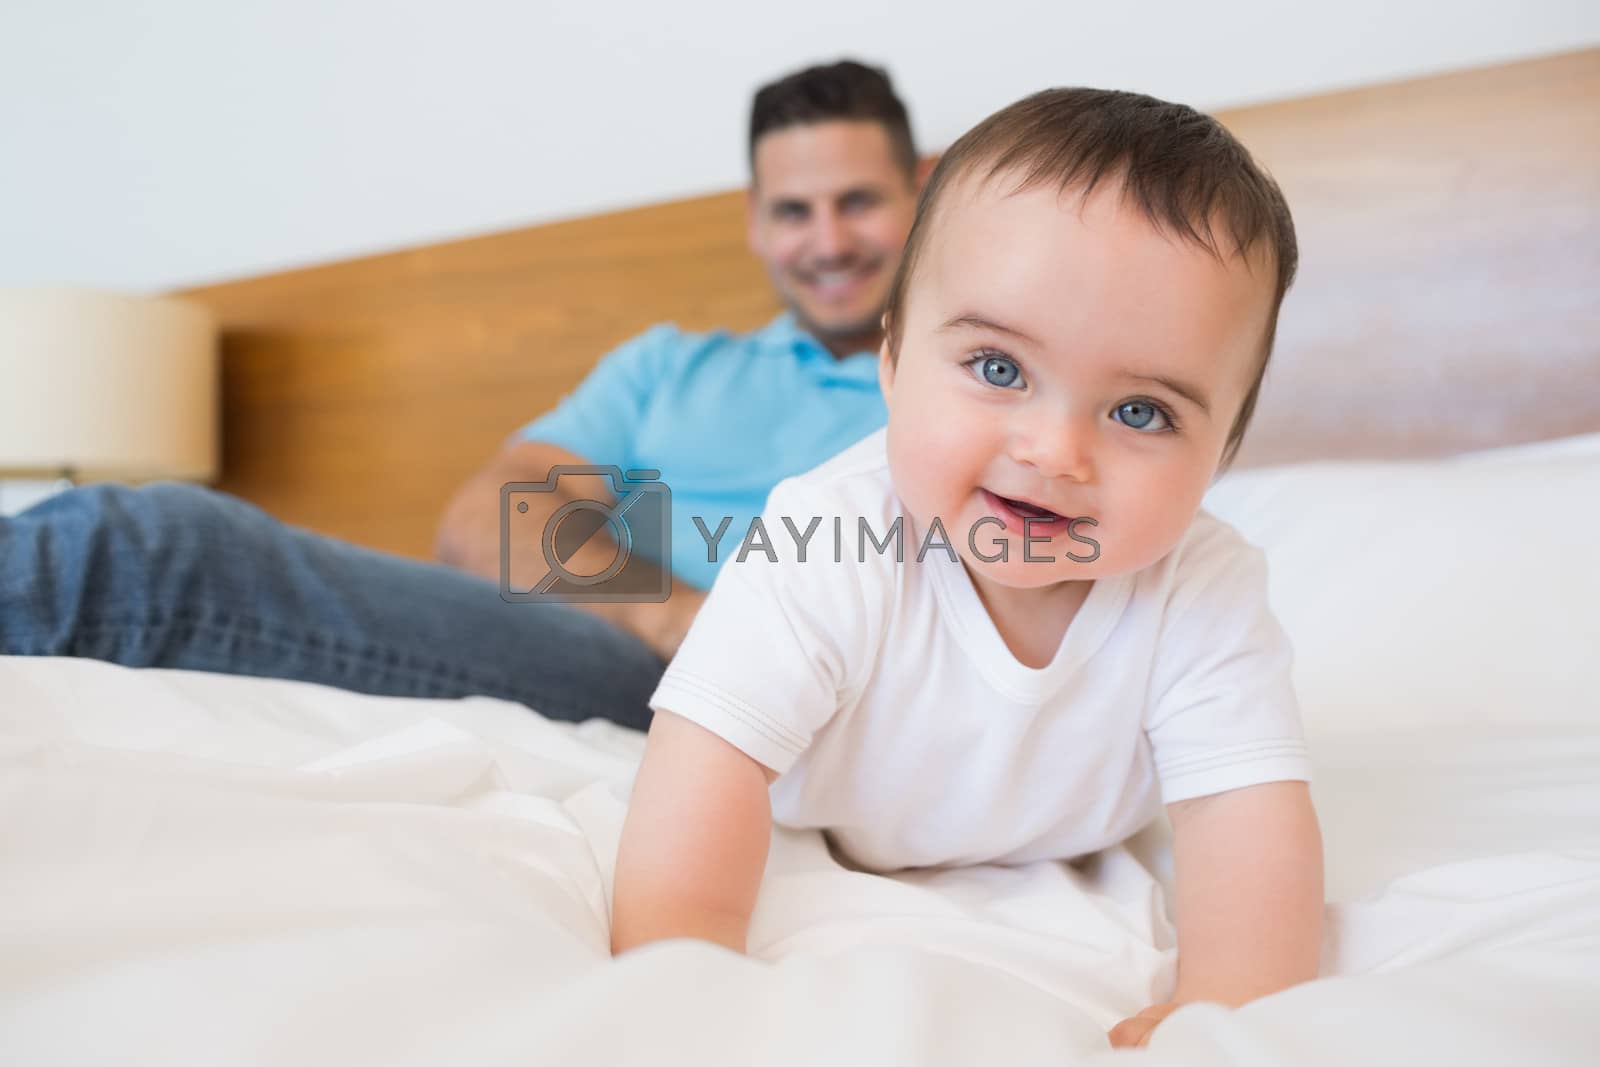 Royalty free image of Adorable baby boy on bed by Wavebreakmedia